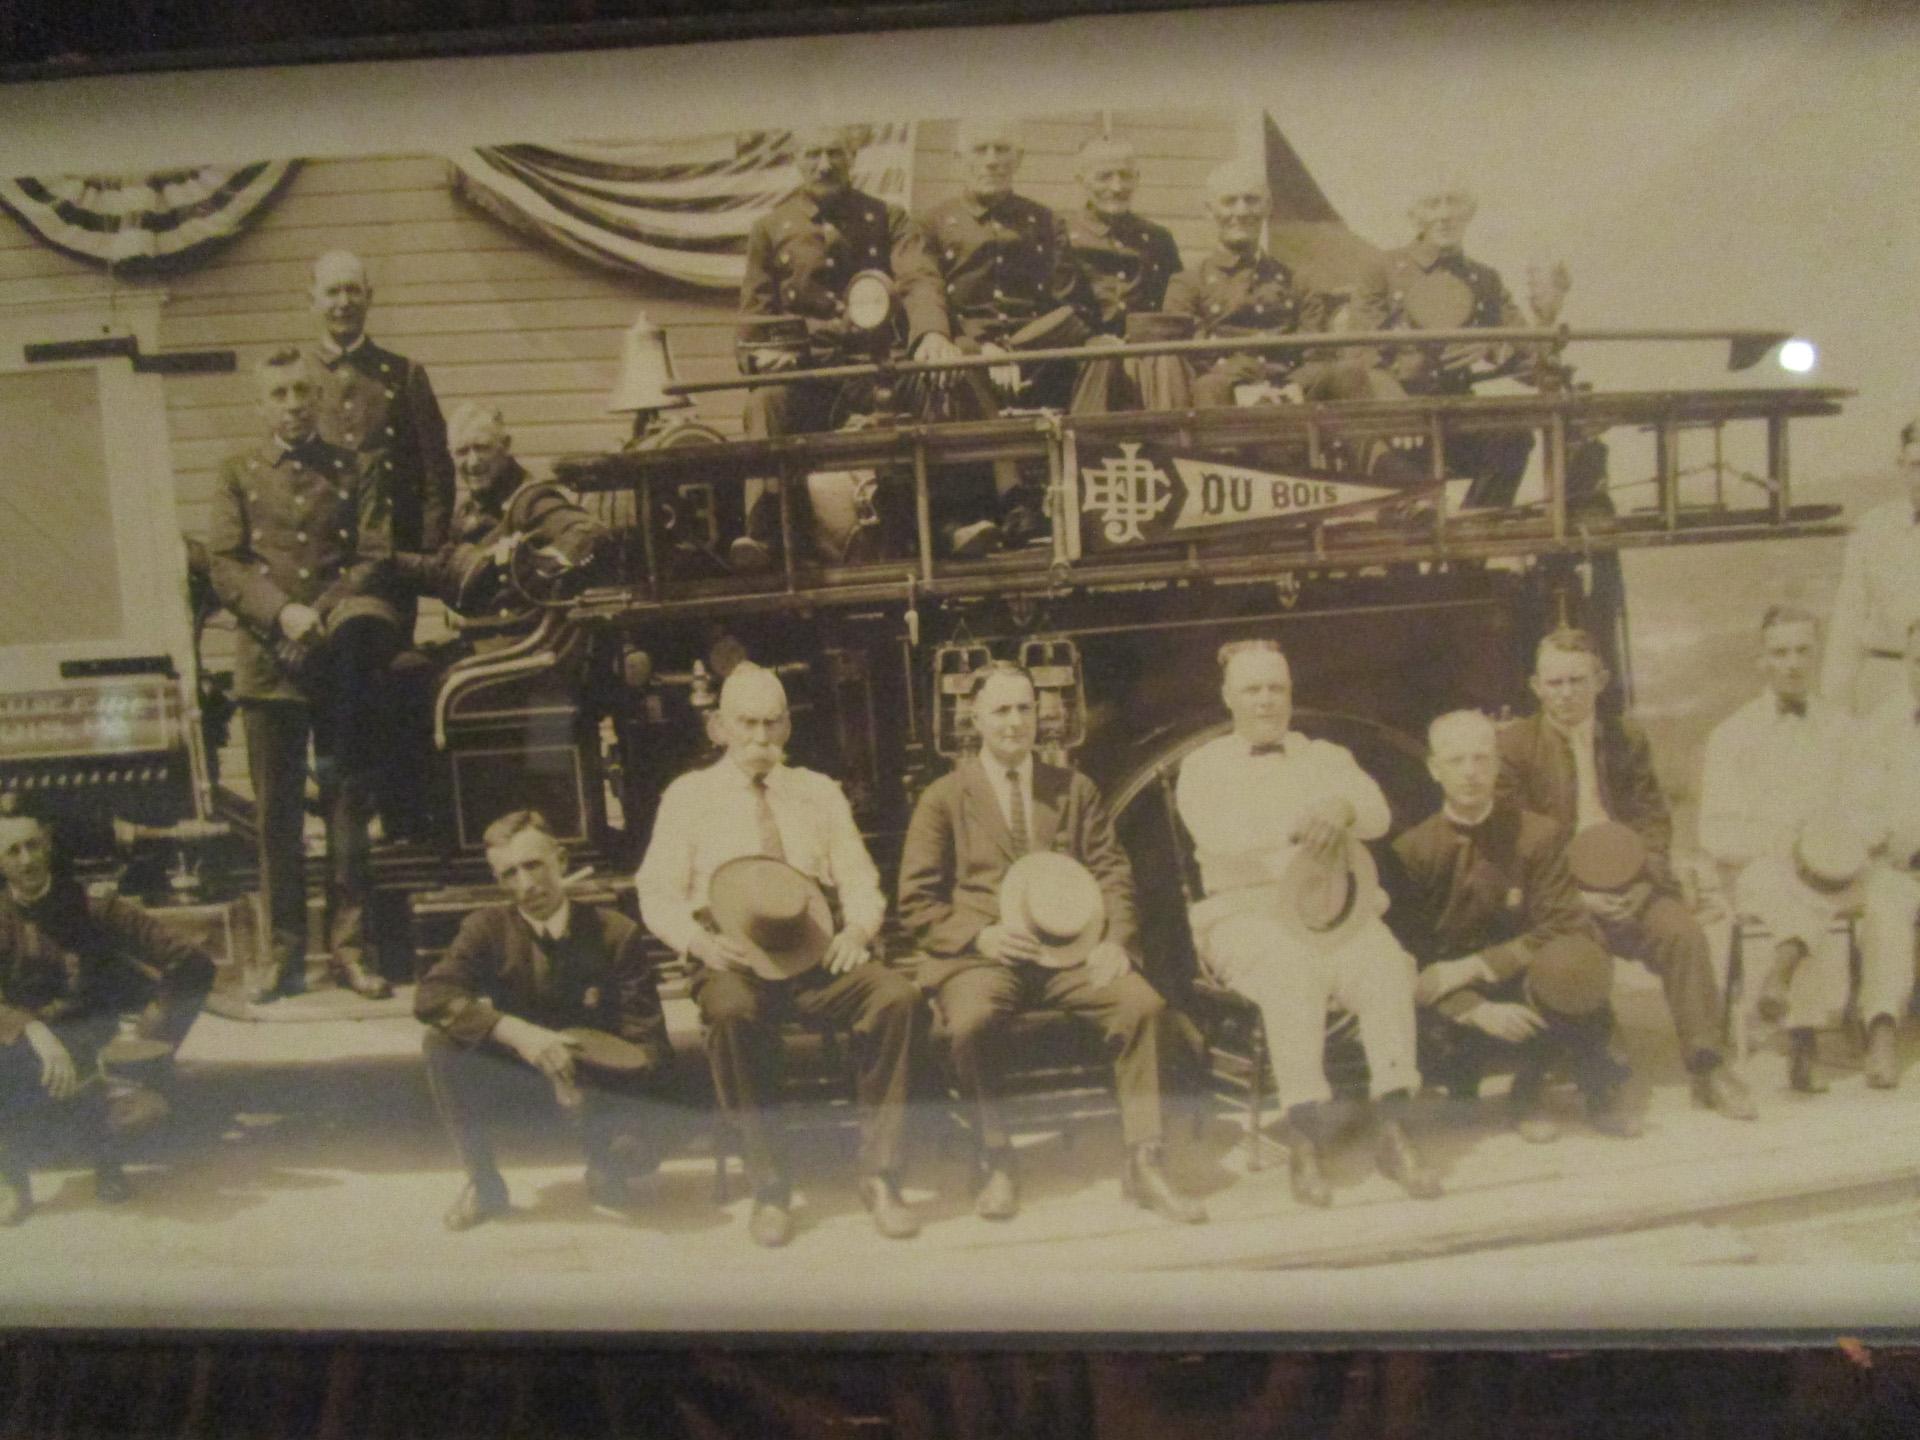 Large black and white panorama photograph featuring forty-six members of the J.E. DuBois Hose Company pictured with their Bureau of Fire, DuBois, PA firetruck. Dated August 17, 1922. Framed in old three quarter inch wooden frame, probably the